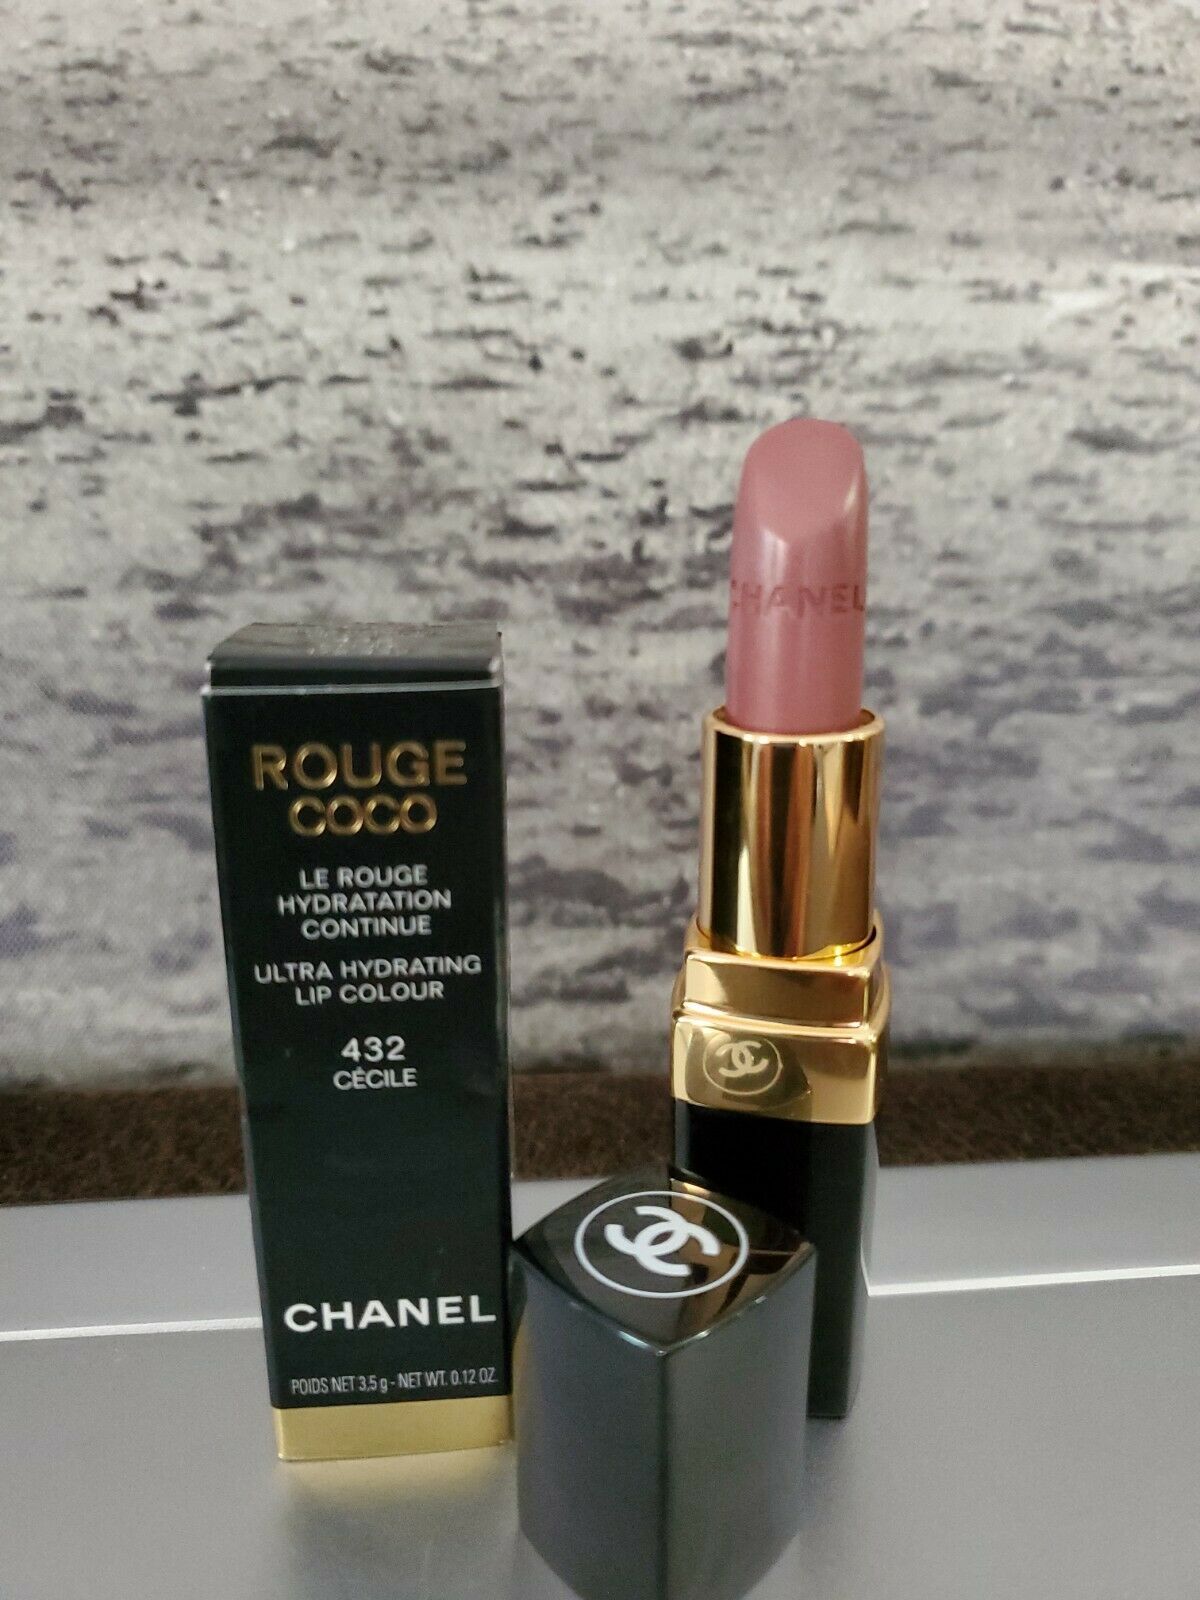 CHANEL ROUGE COCO ULTRA HYDRATING LIP COLOUR 432 CÉCILE FULL SIZE